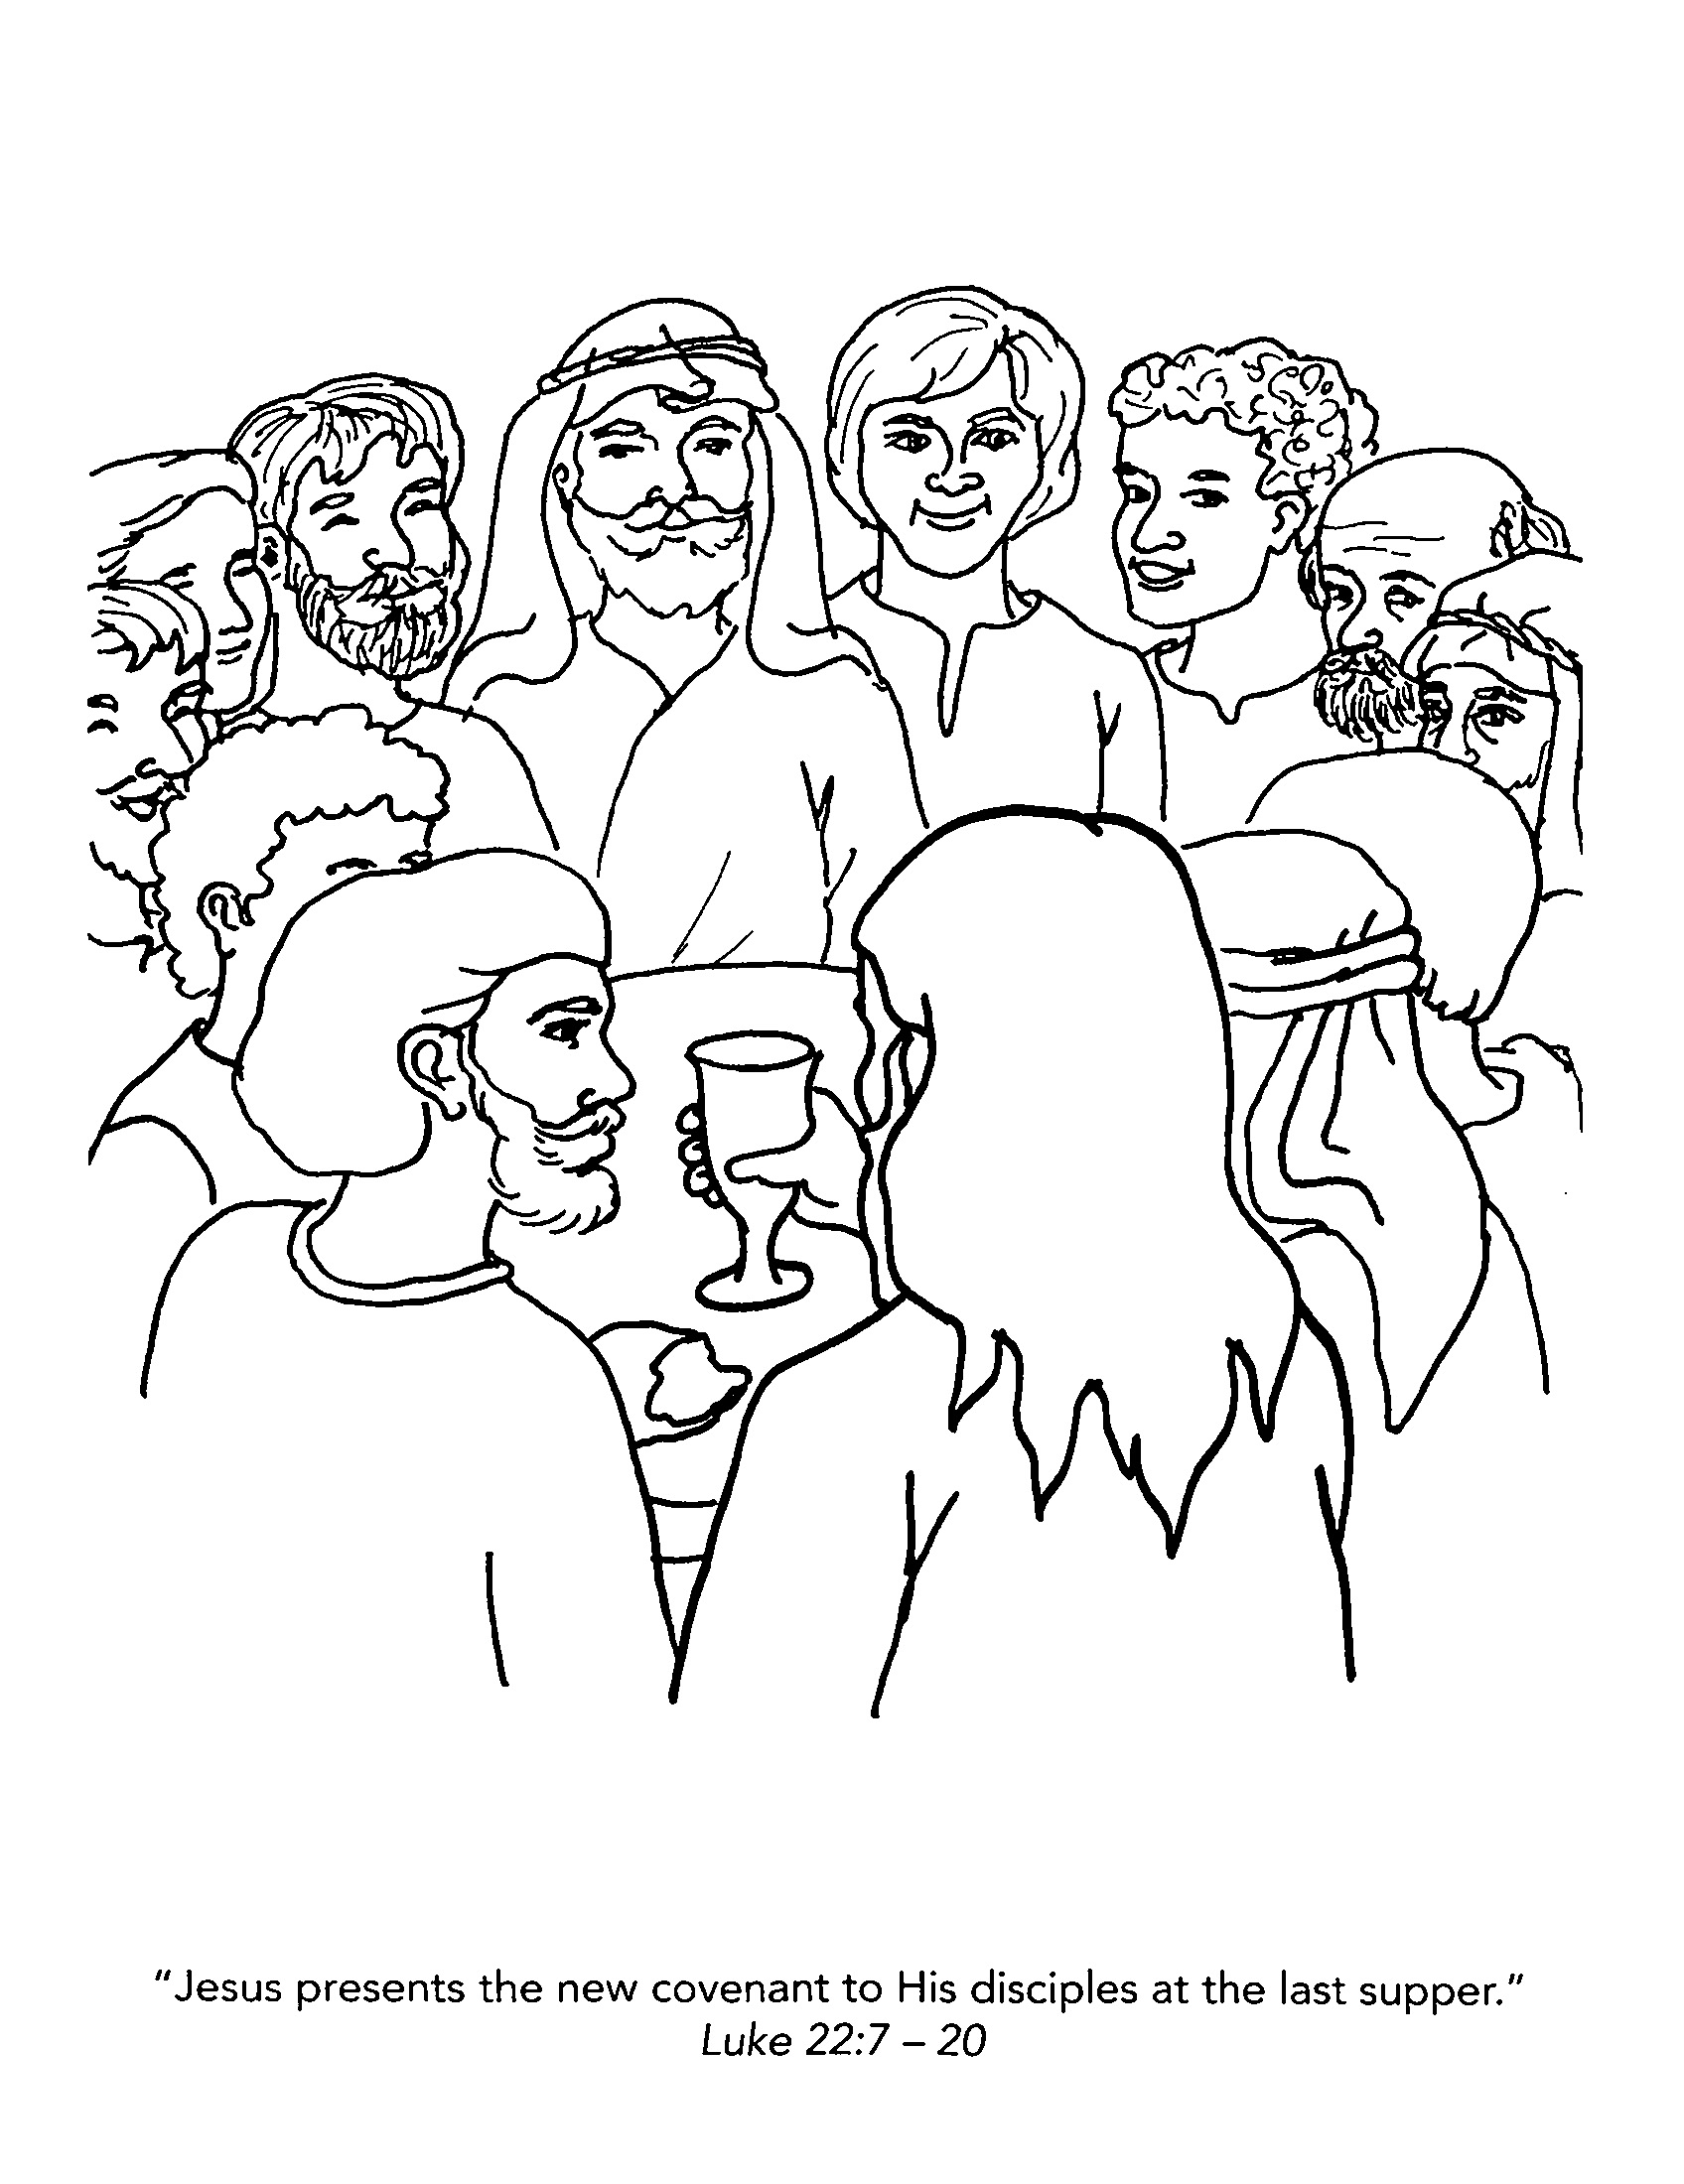 12 disciples of jesus clipart with world